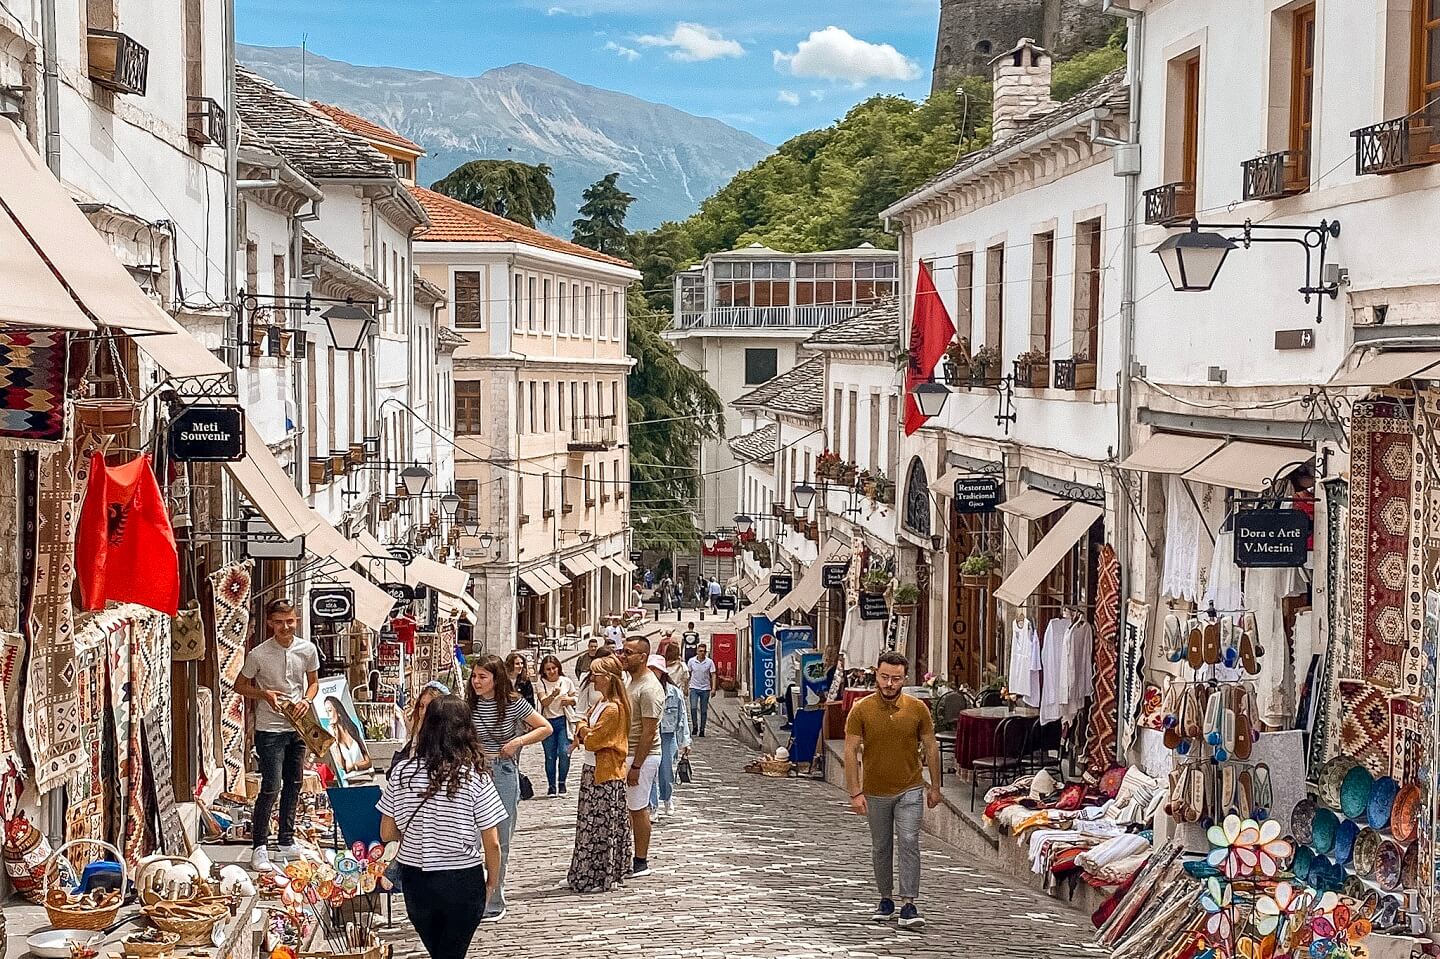 Strest with local shops in Gjirokaster